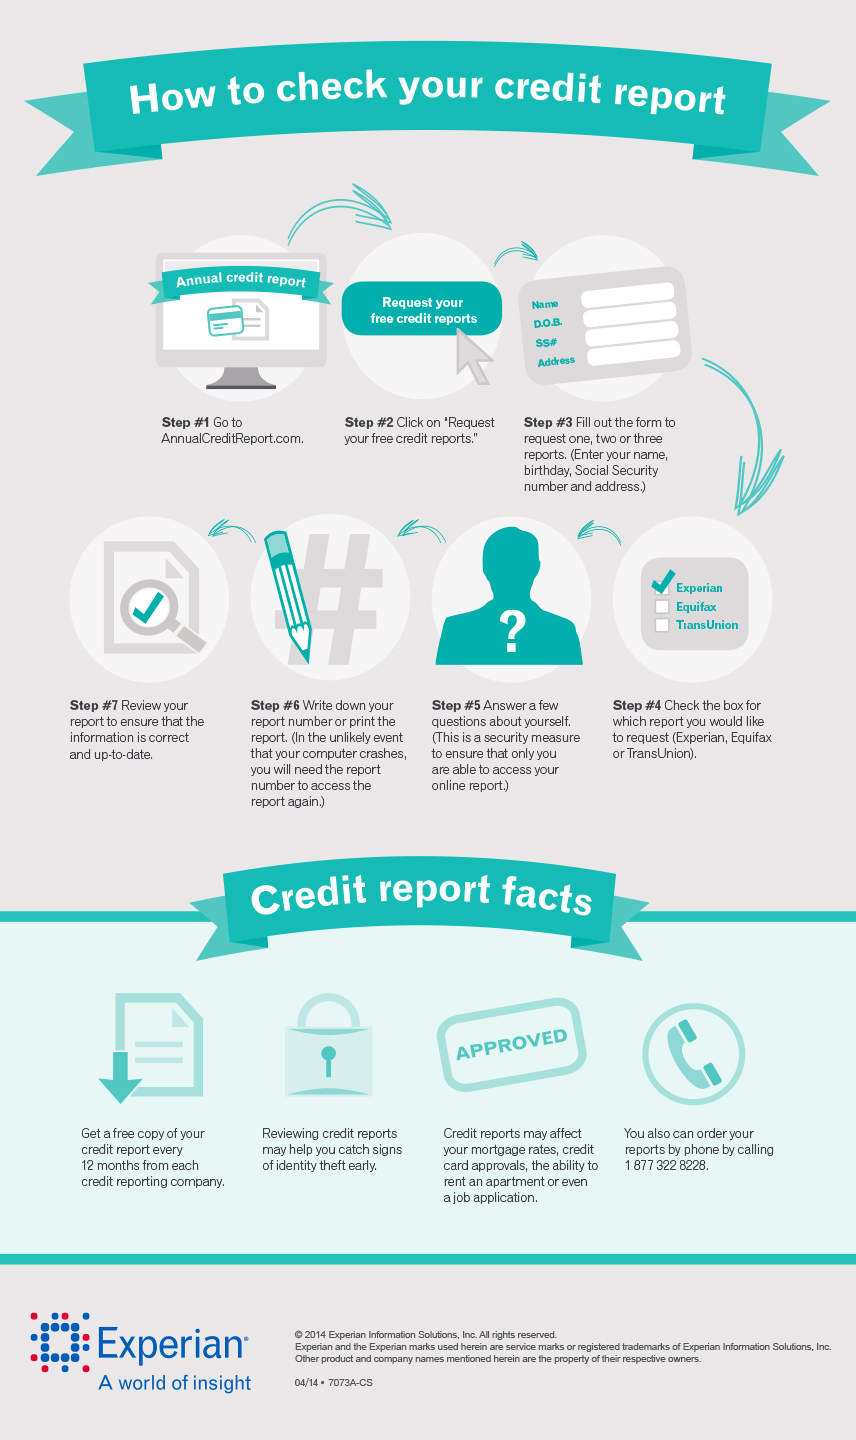 How-to-check-your-credit-report-infographic-April-2014-FINAL